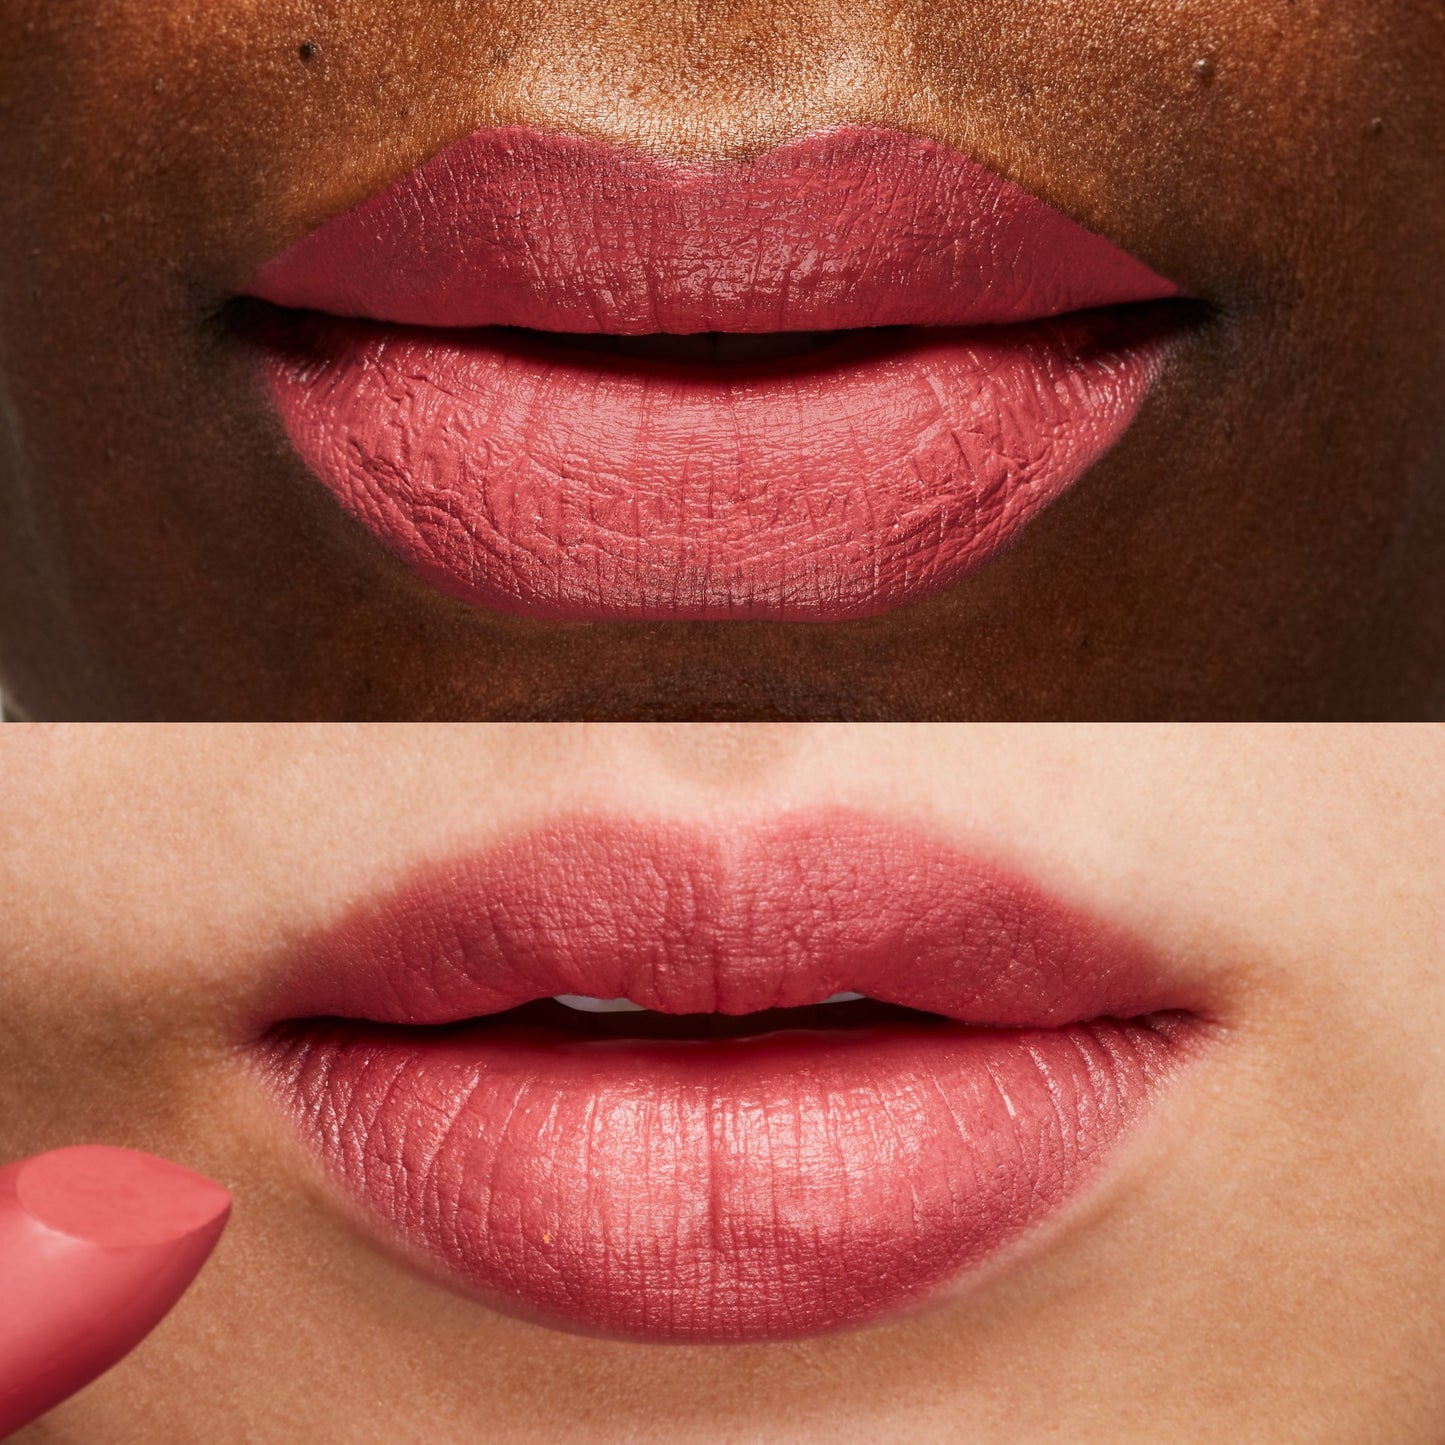 100% PURE Fruit Pigmented Cocoa Butter Matte Lipstick plume pink